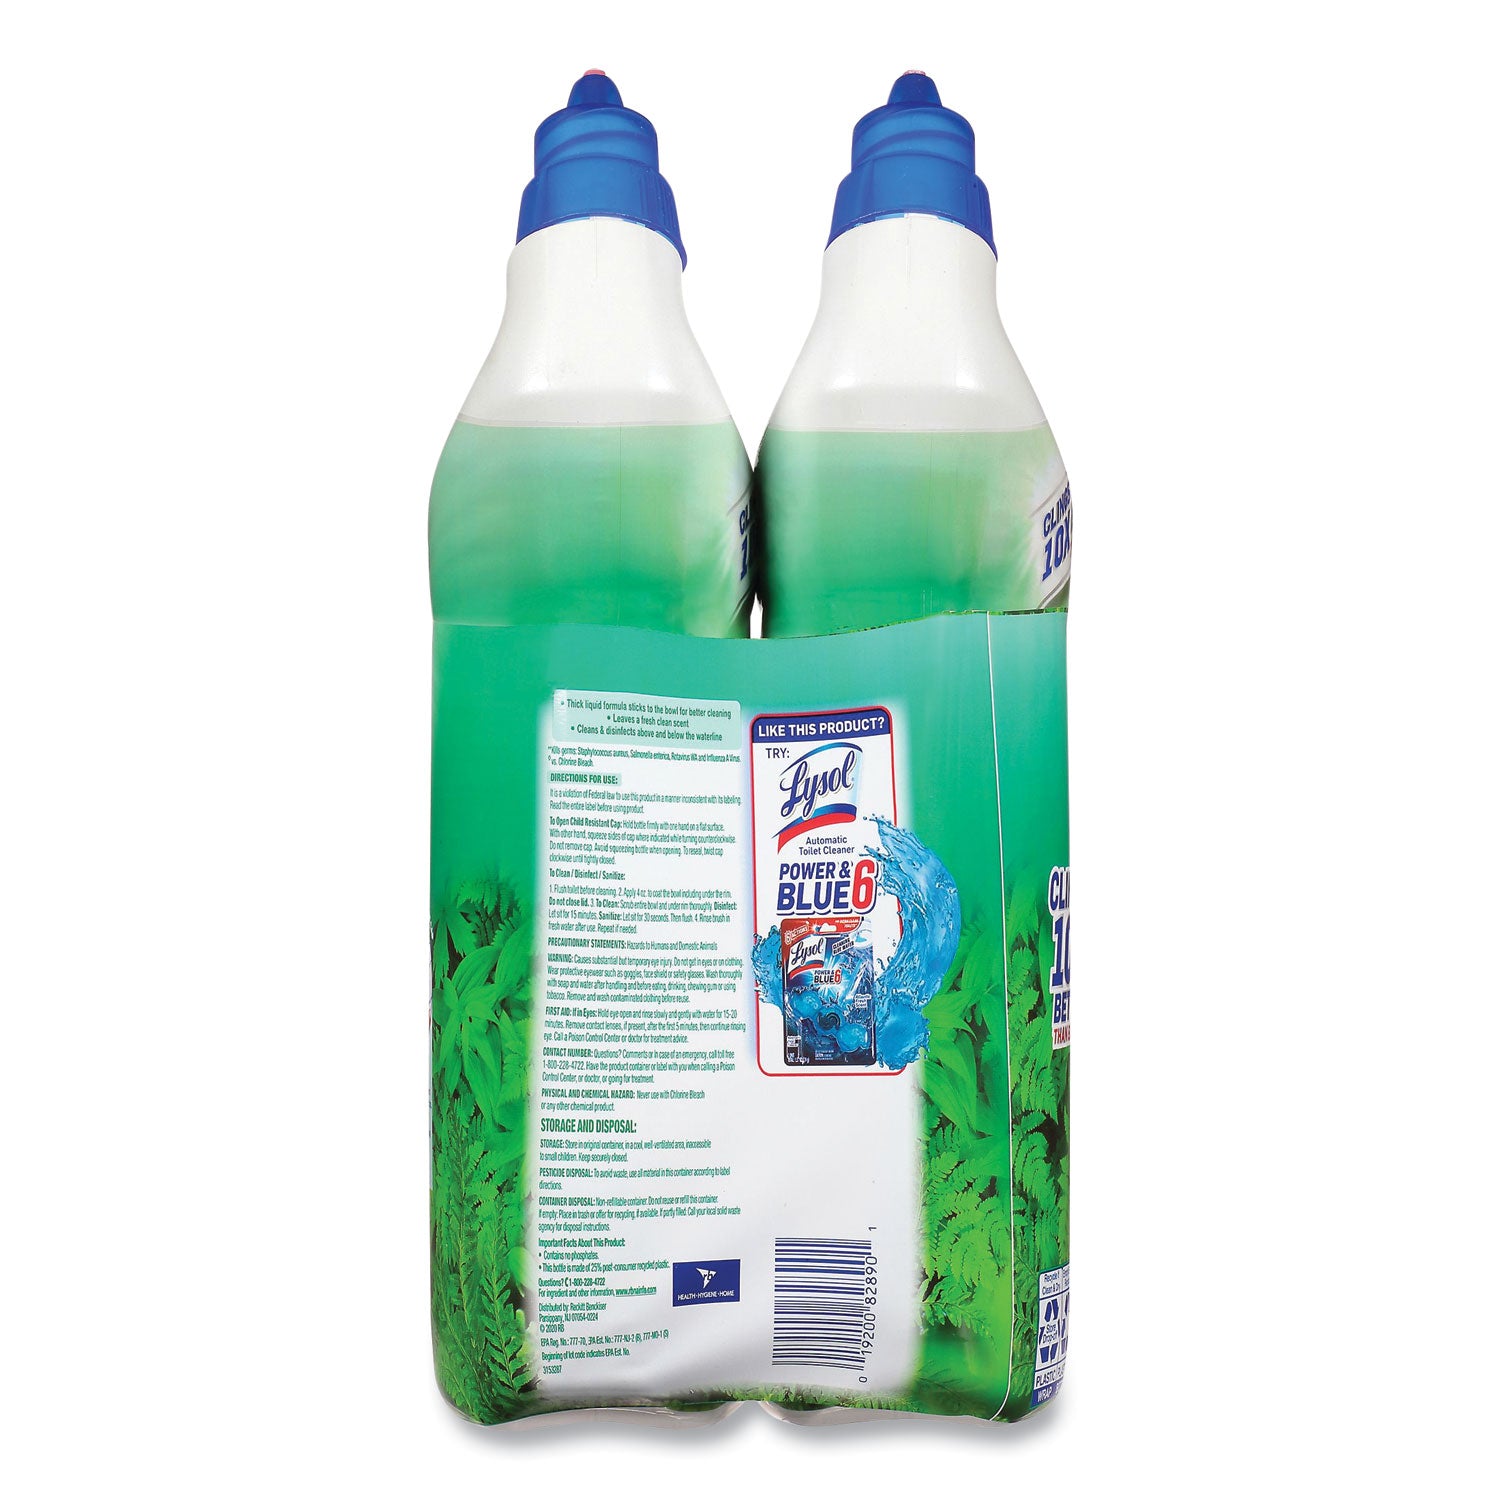 cling-and-fresh-toilet-bowl-cleaner-forest-rain-scent-24-oz-2-pack_rac98015pk - 2